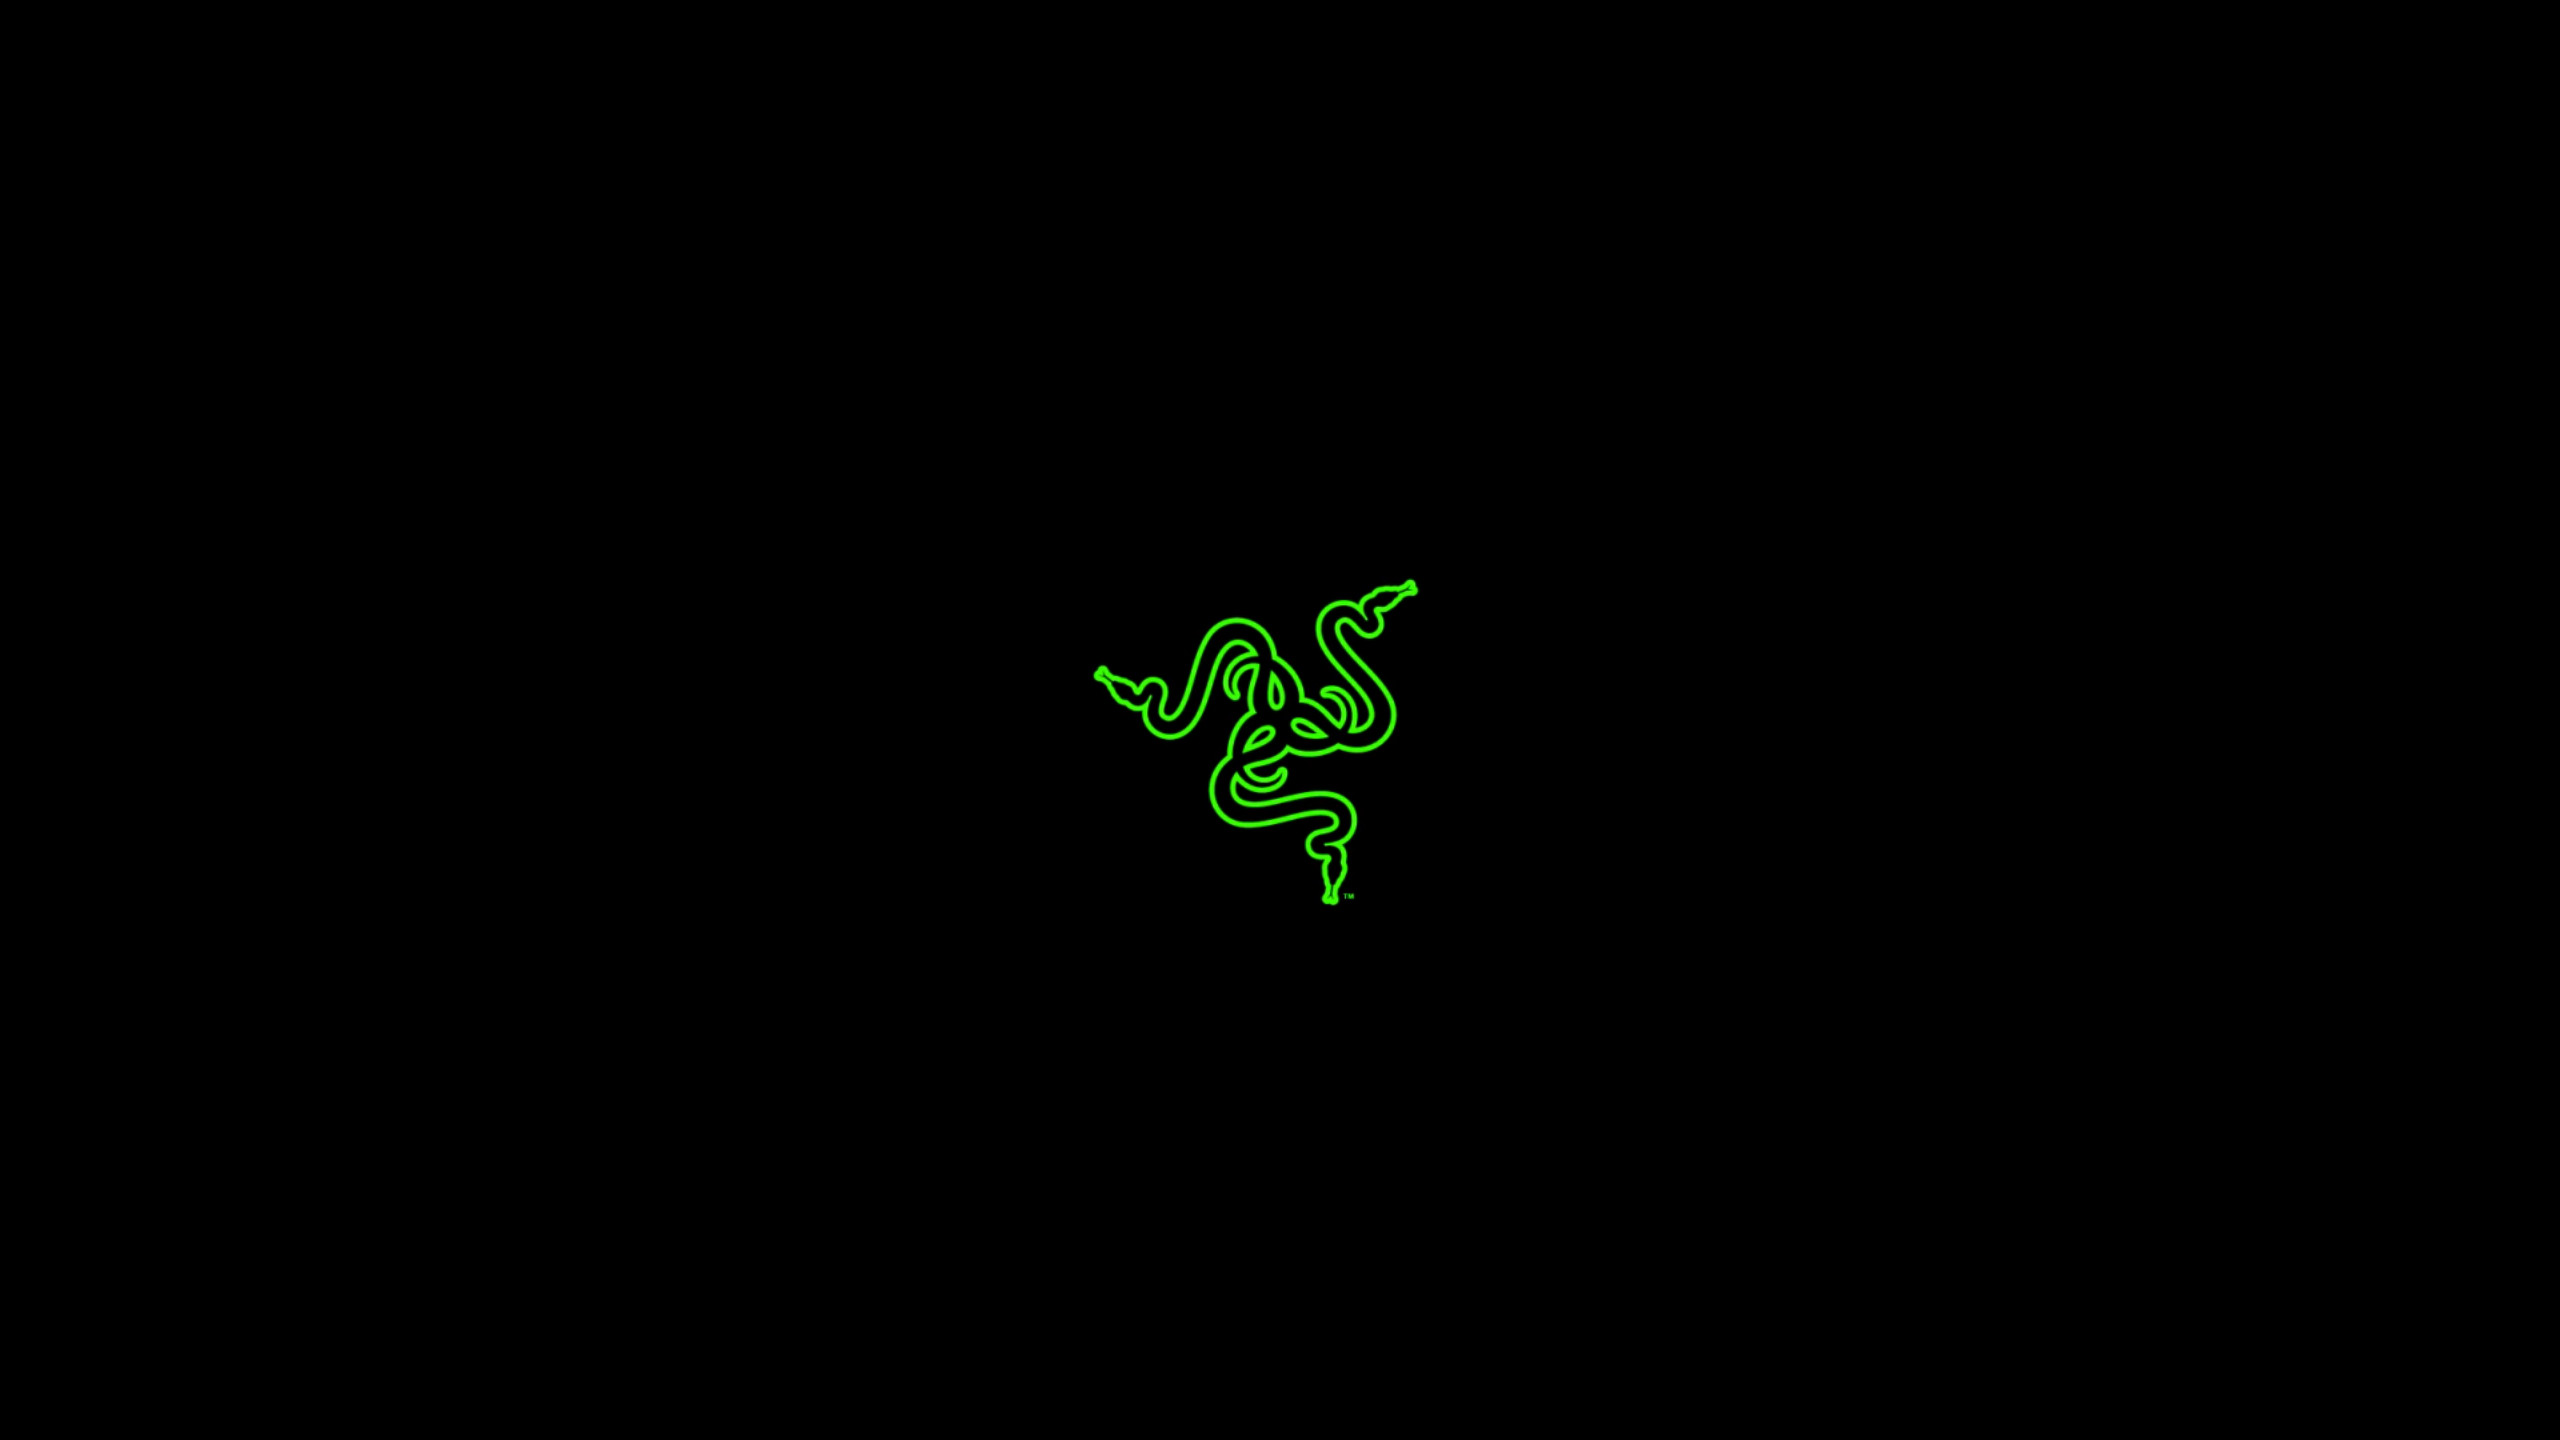 2560x1440 text logo insect PC gaming PC Master Race Razer line darkness screenshot computer  wallpaper font